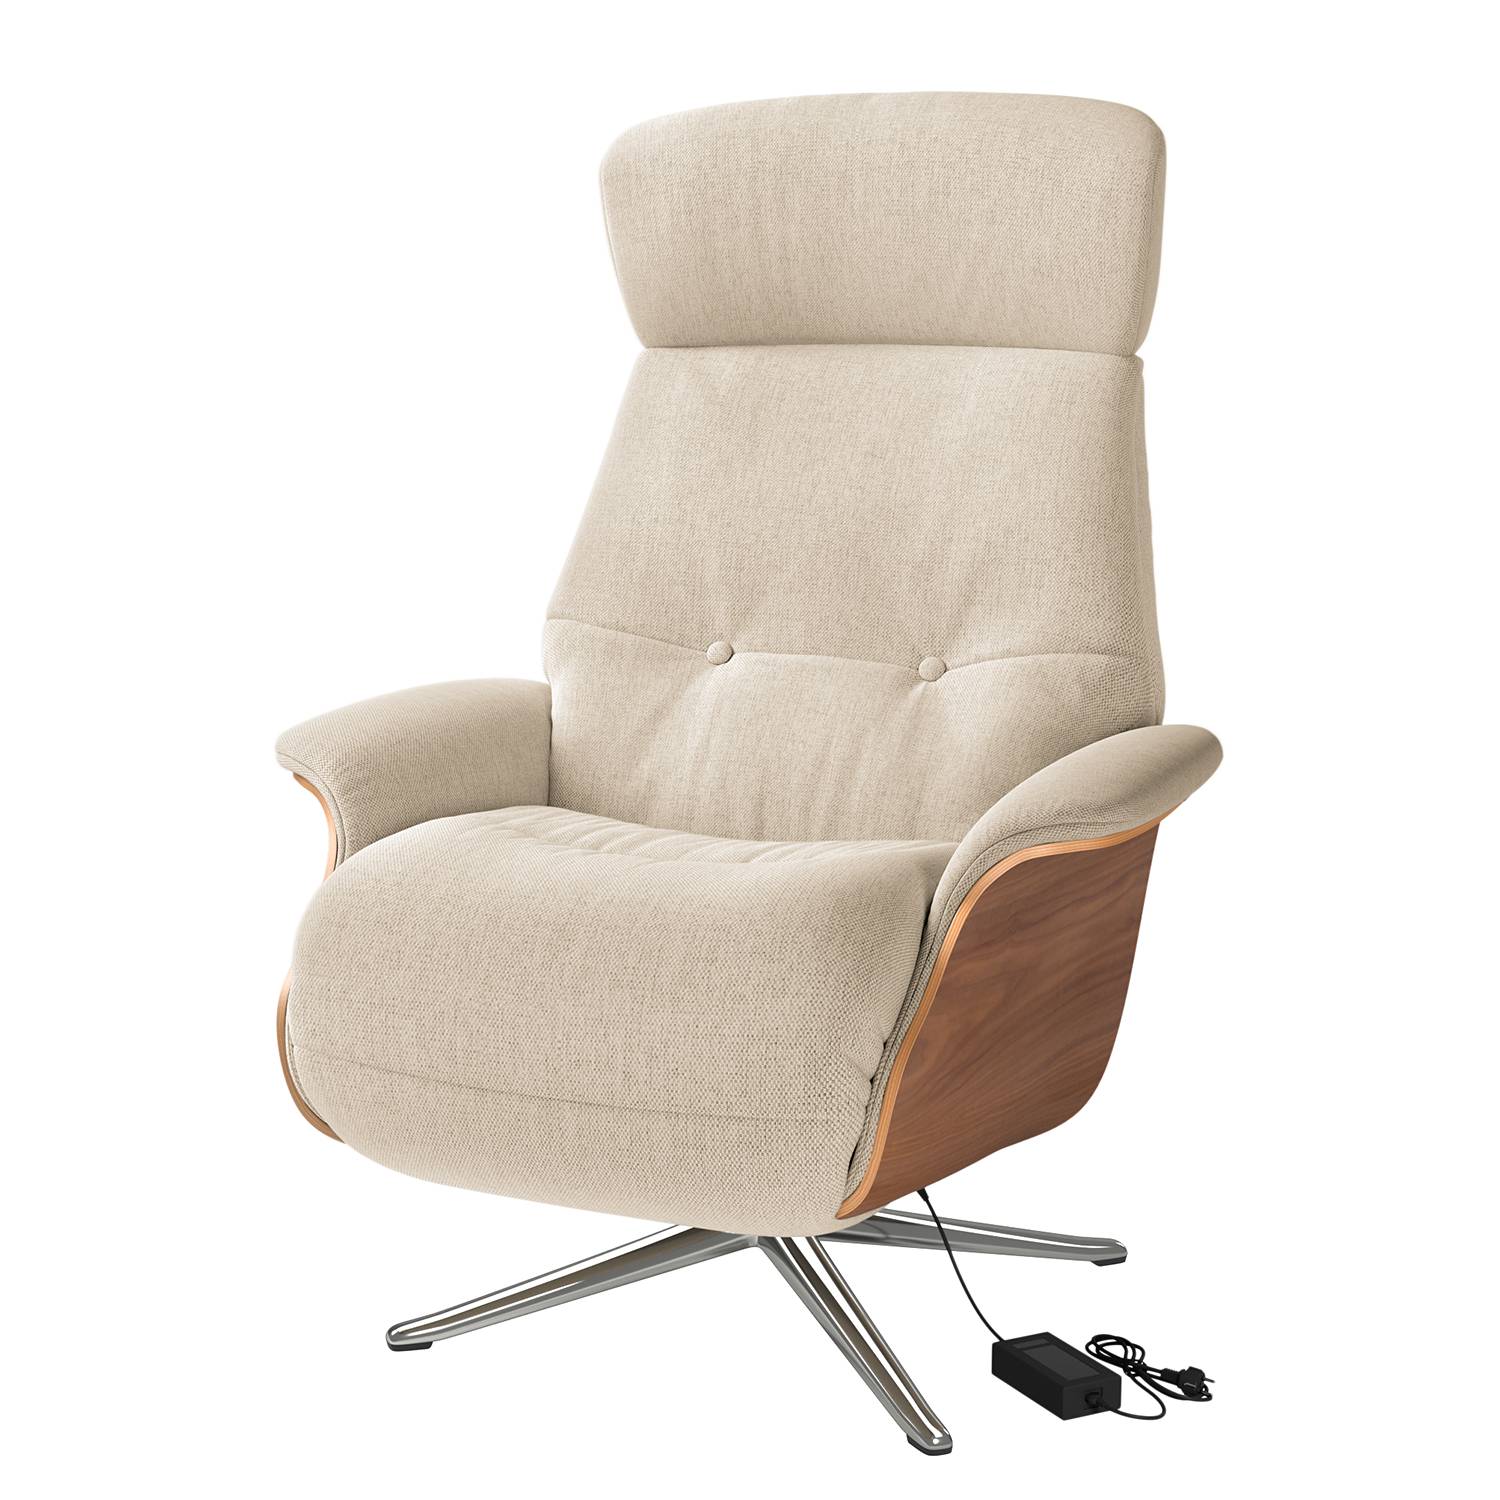 Image of Fauteuil relax Anderson III 000000001000131426